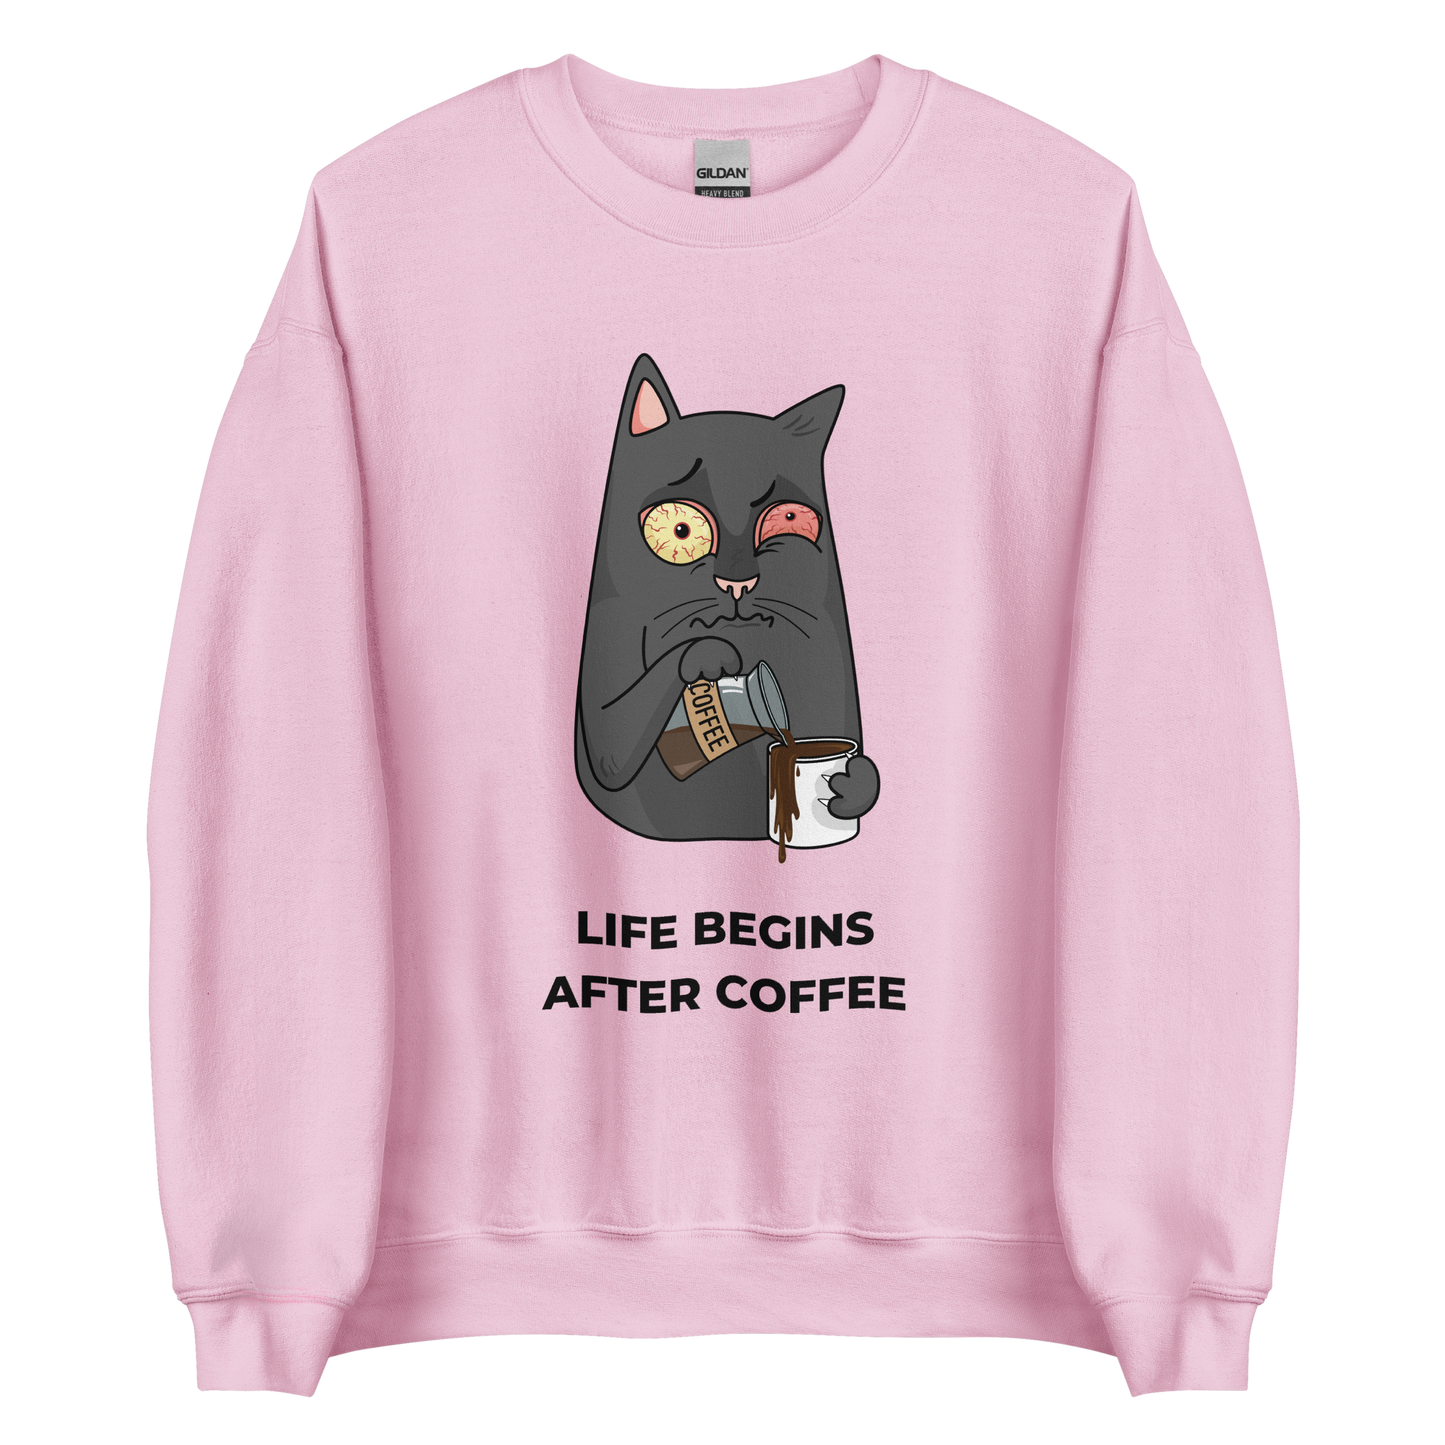 Light Pink Cat Sweatshirt featuring a hilarious Life Begins After Coffee graphic on the chest - Funny Graphic Cat Sweatshirts - Boozy Fox